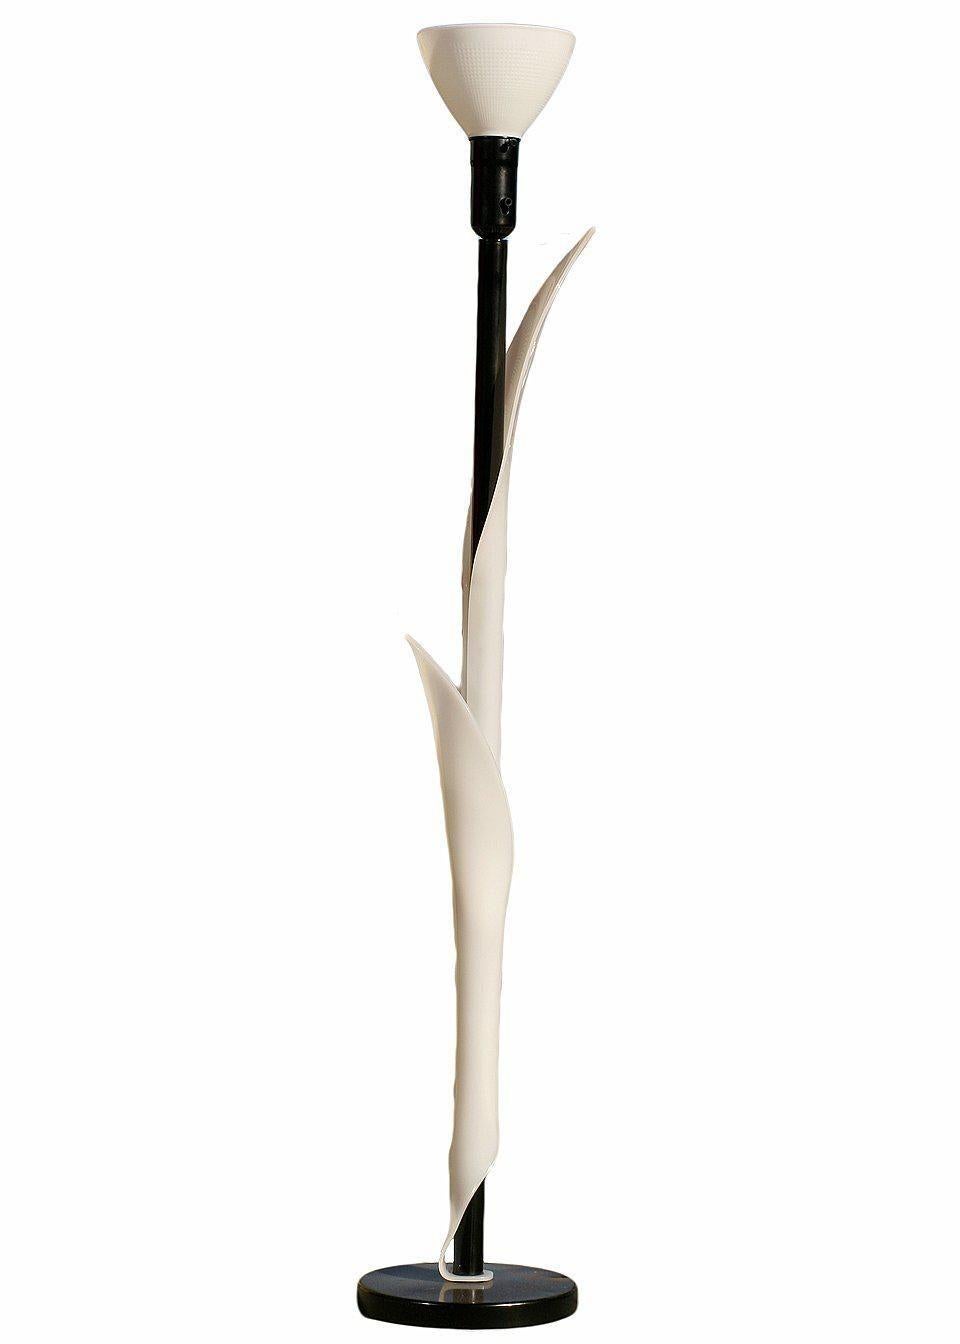 Late 20th Century Sculptural Acrylic Floor Lamp by Rougier For Sale